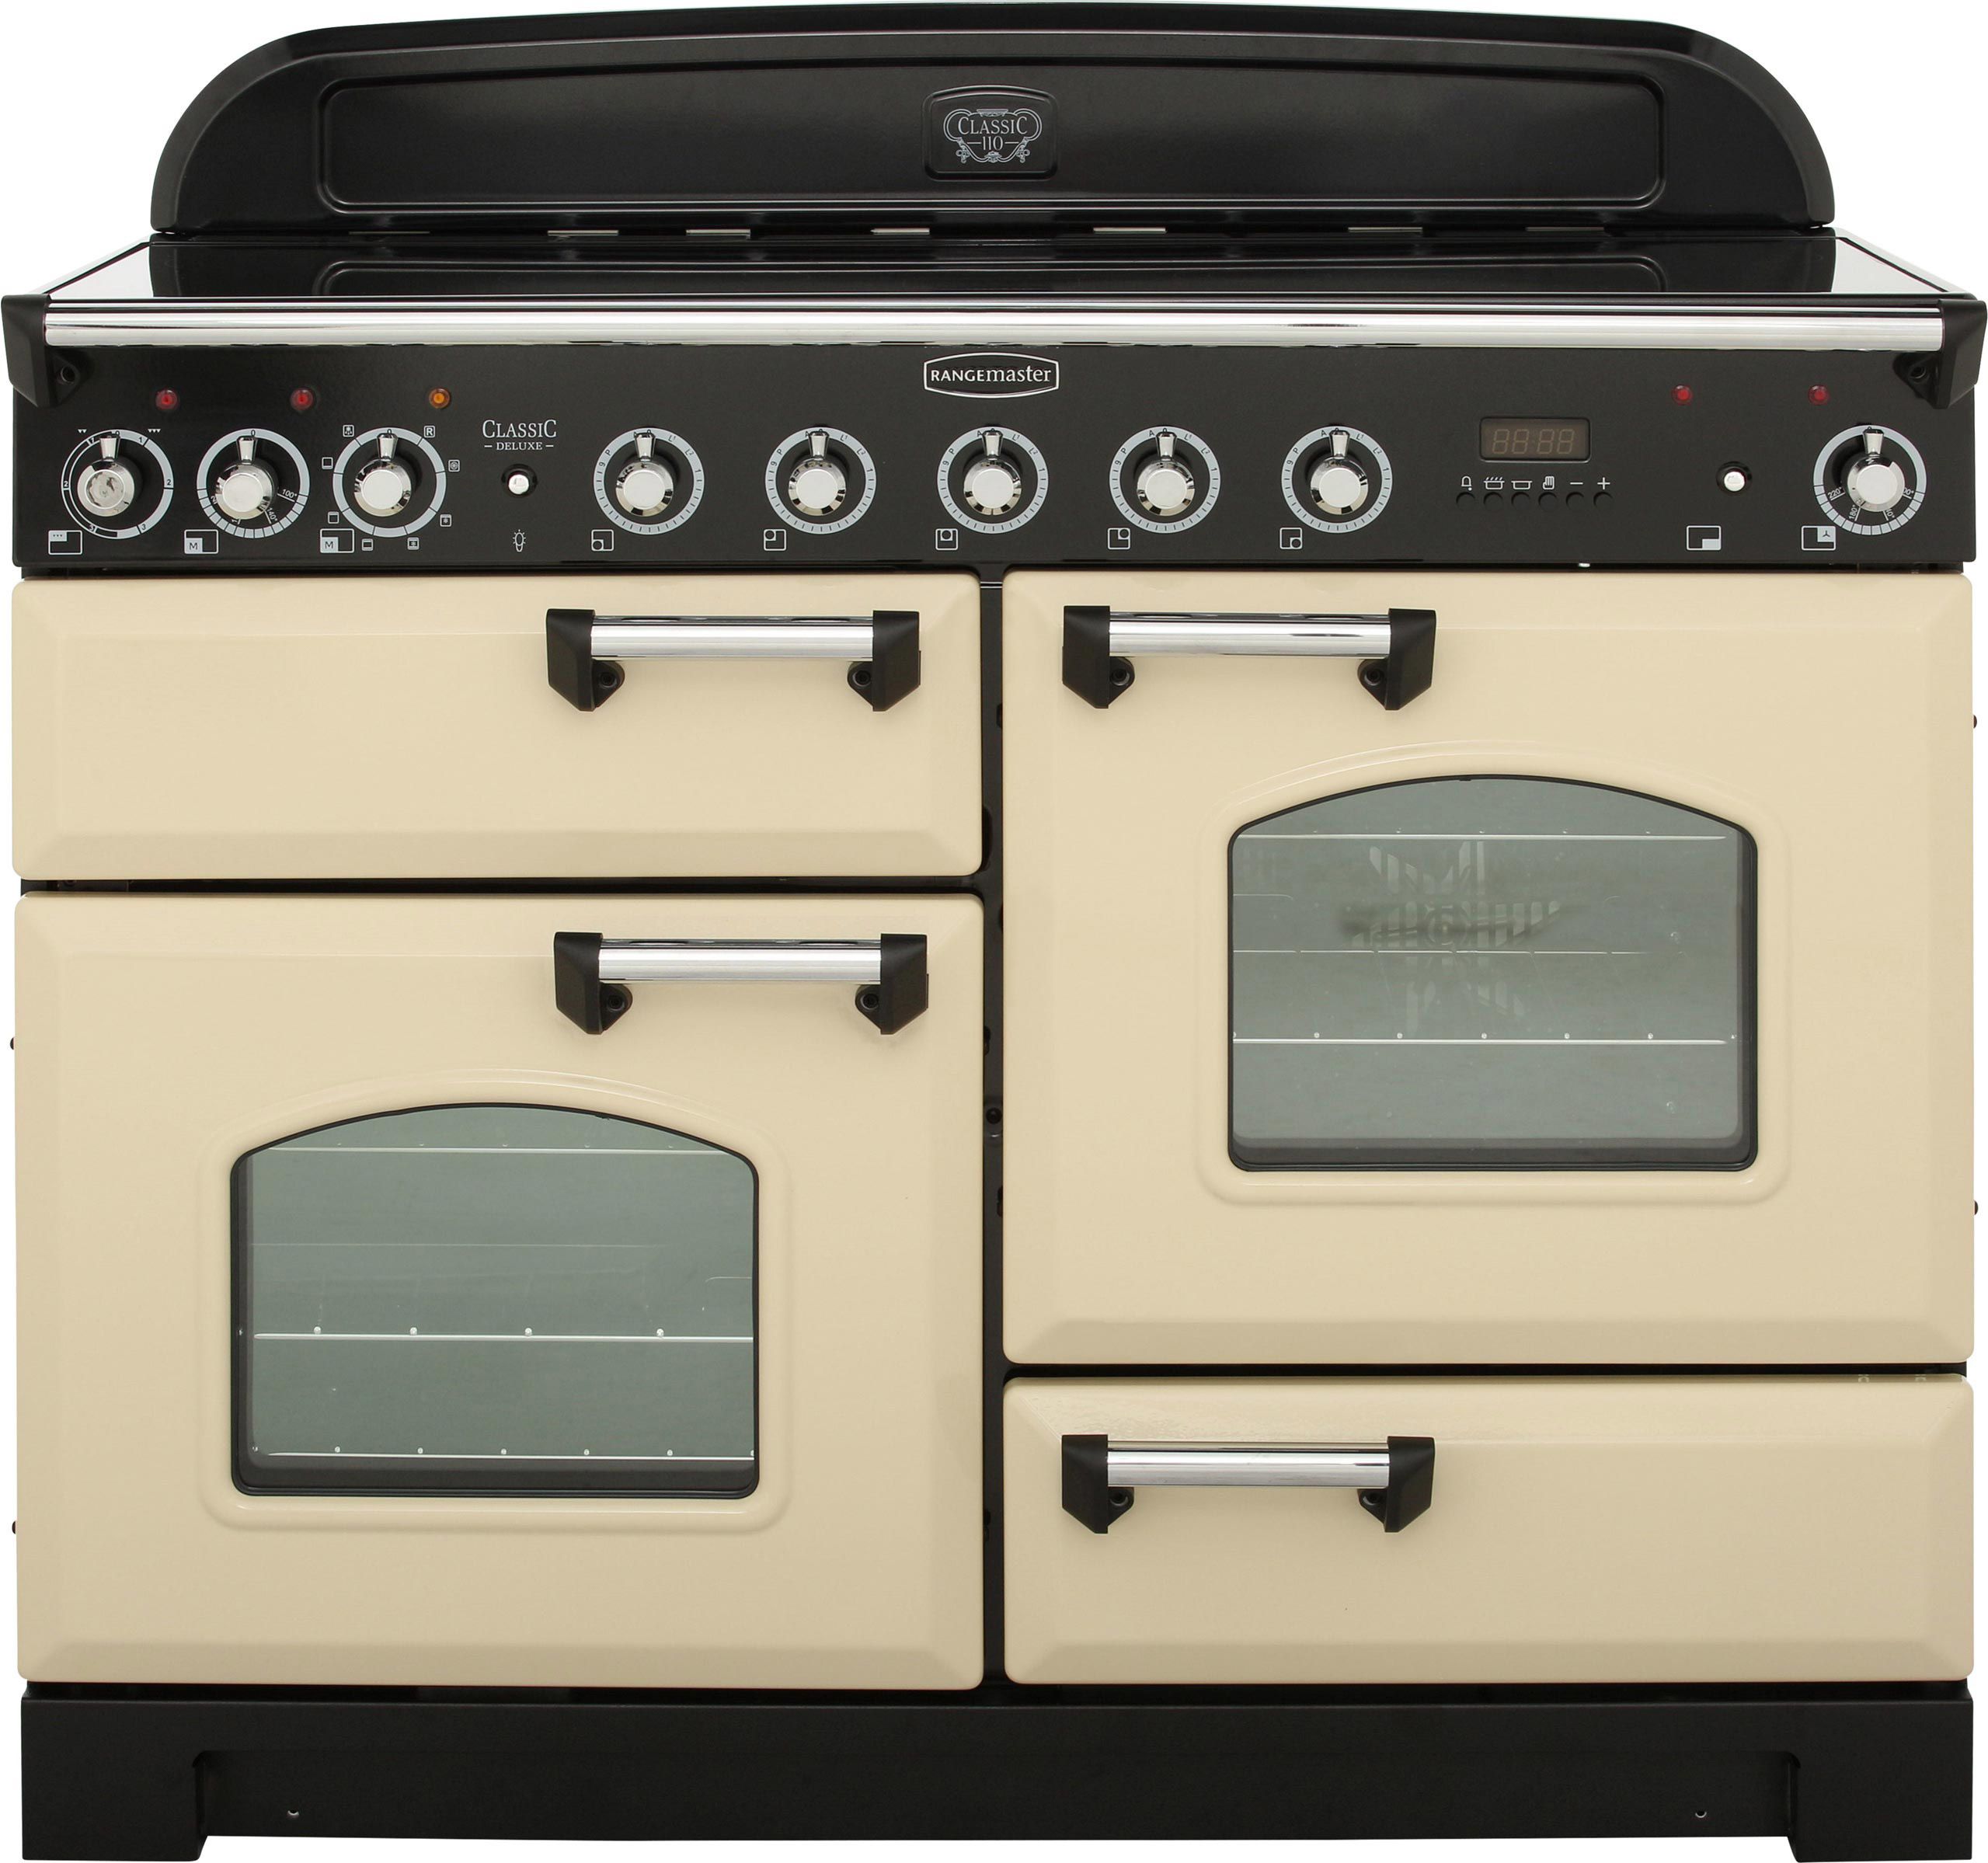 Rangemaster Classic Deluxe CDL110EICR/C 110cm Electric Range Cooker with Induction Hob - Cream / Chrome - A/A Rated, Cream